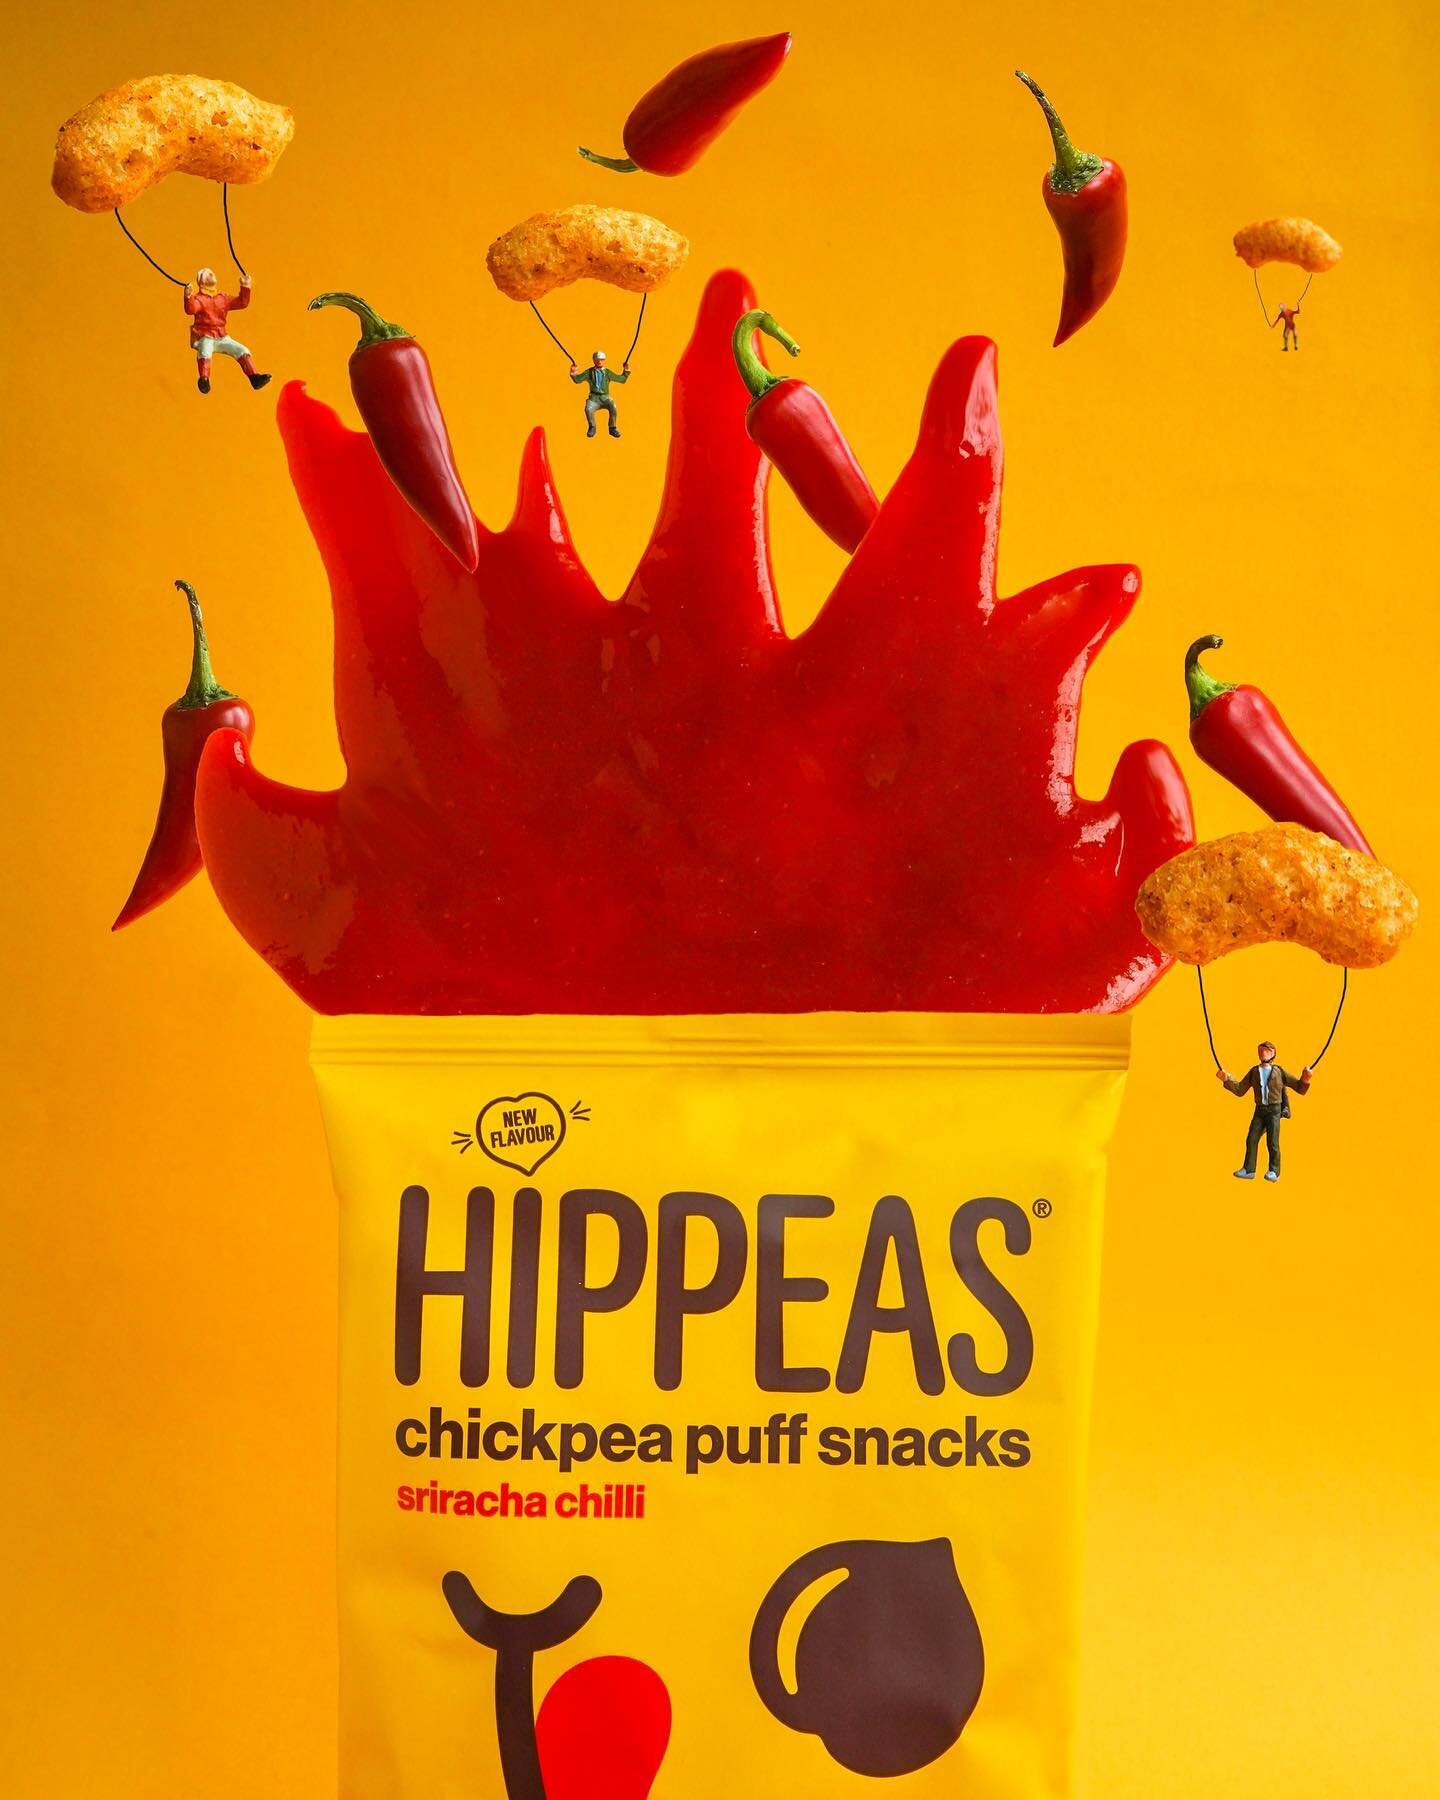 🌶️LTP x HIPPEAS🌶️
.
.
.
I got the chance to work with @hippeas_snacks_uk on a scene for their Sriracha Chilli Puffs! 
I love how the final photo came out, the Little People using the Puffs as parachutes escaping from the Sriracha Chilli explosion.
